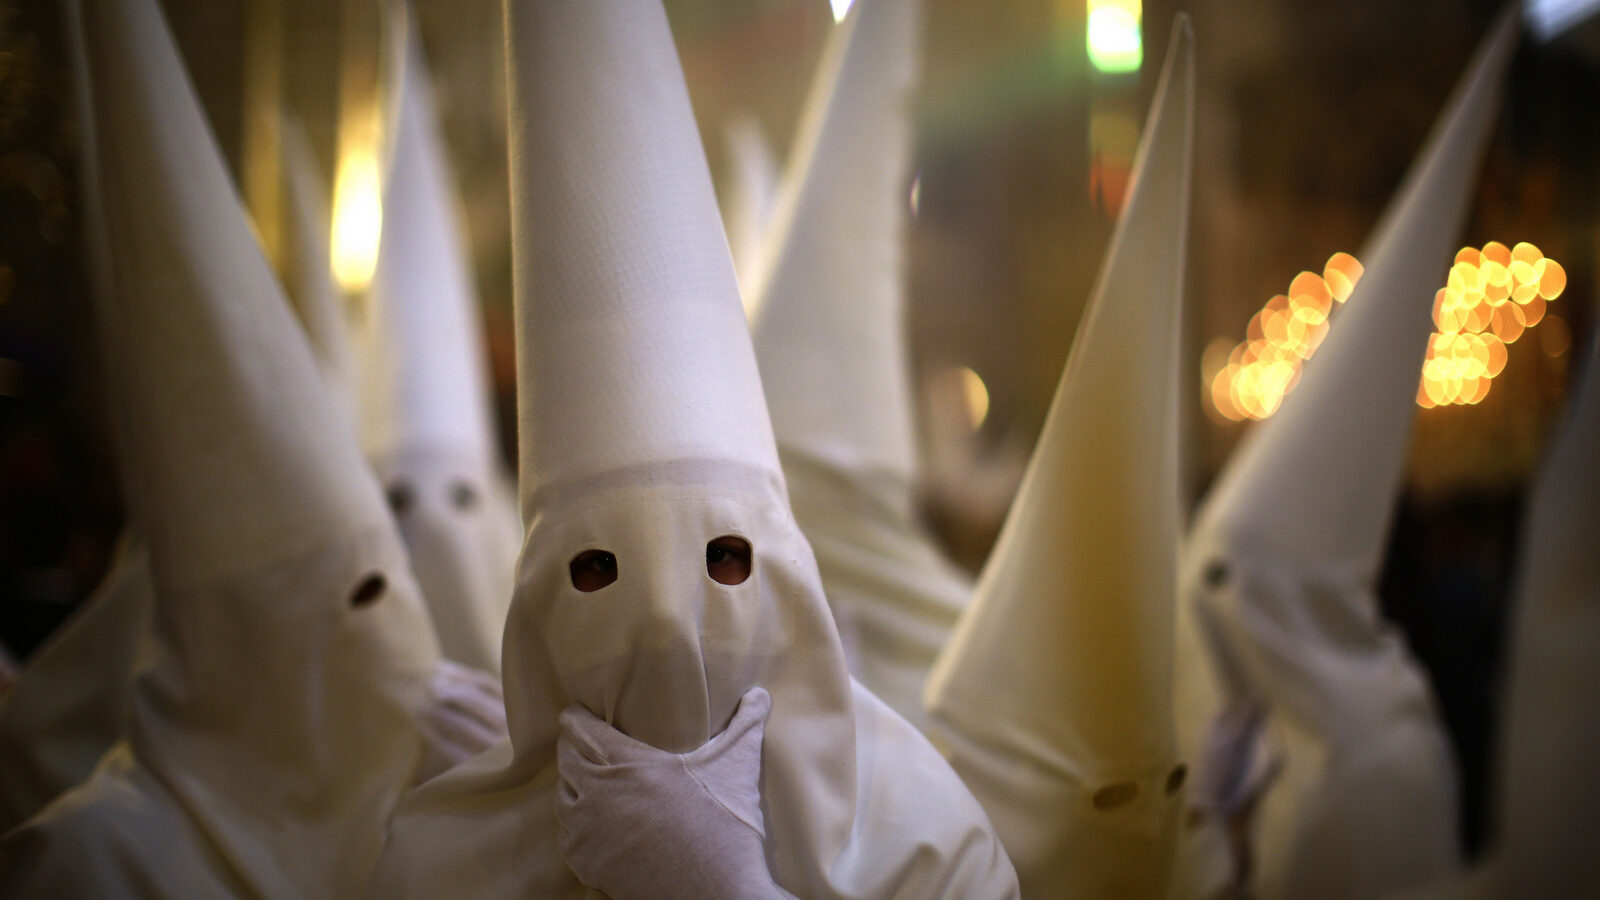 Hooded penitents from "La Borriquita" take part during a Holy Week procession in Cordoba, Spain, Sunday, April 9, 2017. Hundreds of processions take place throughout Spain during the Easter Holy Week. (AP/Manu Fernandez)